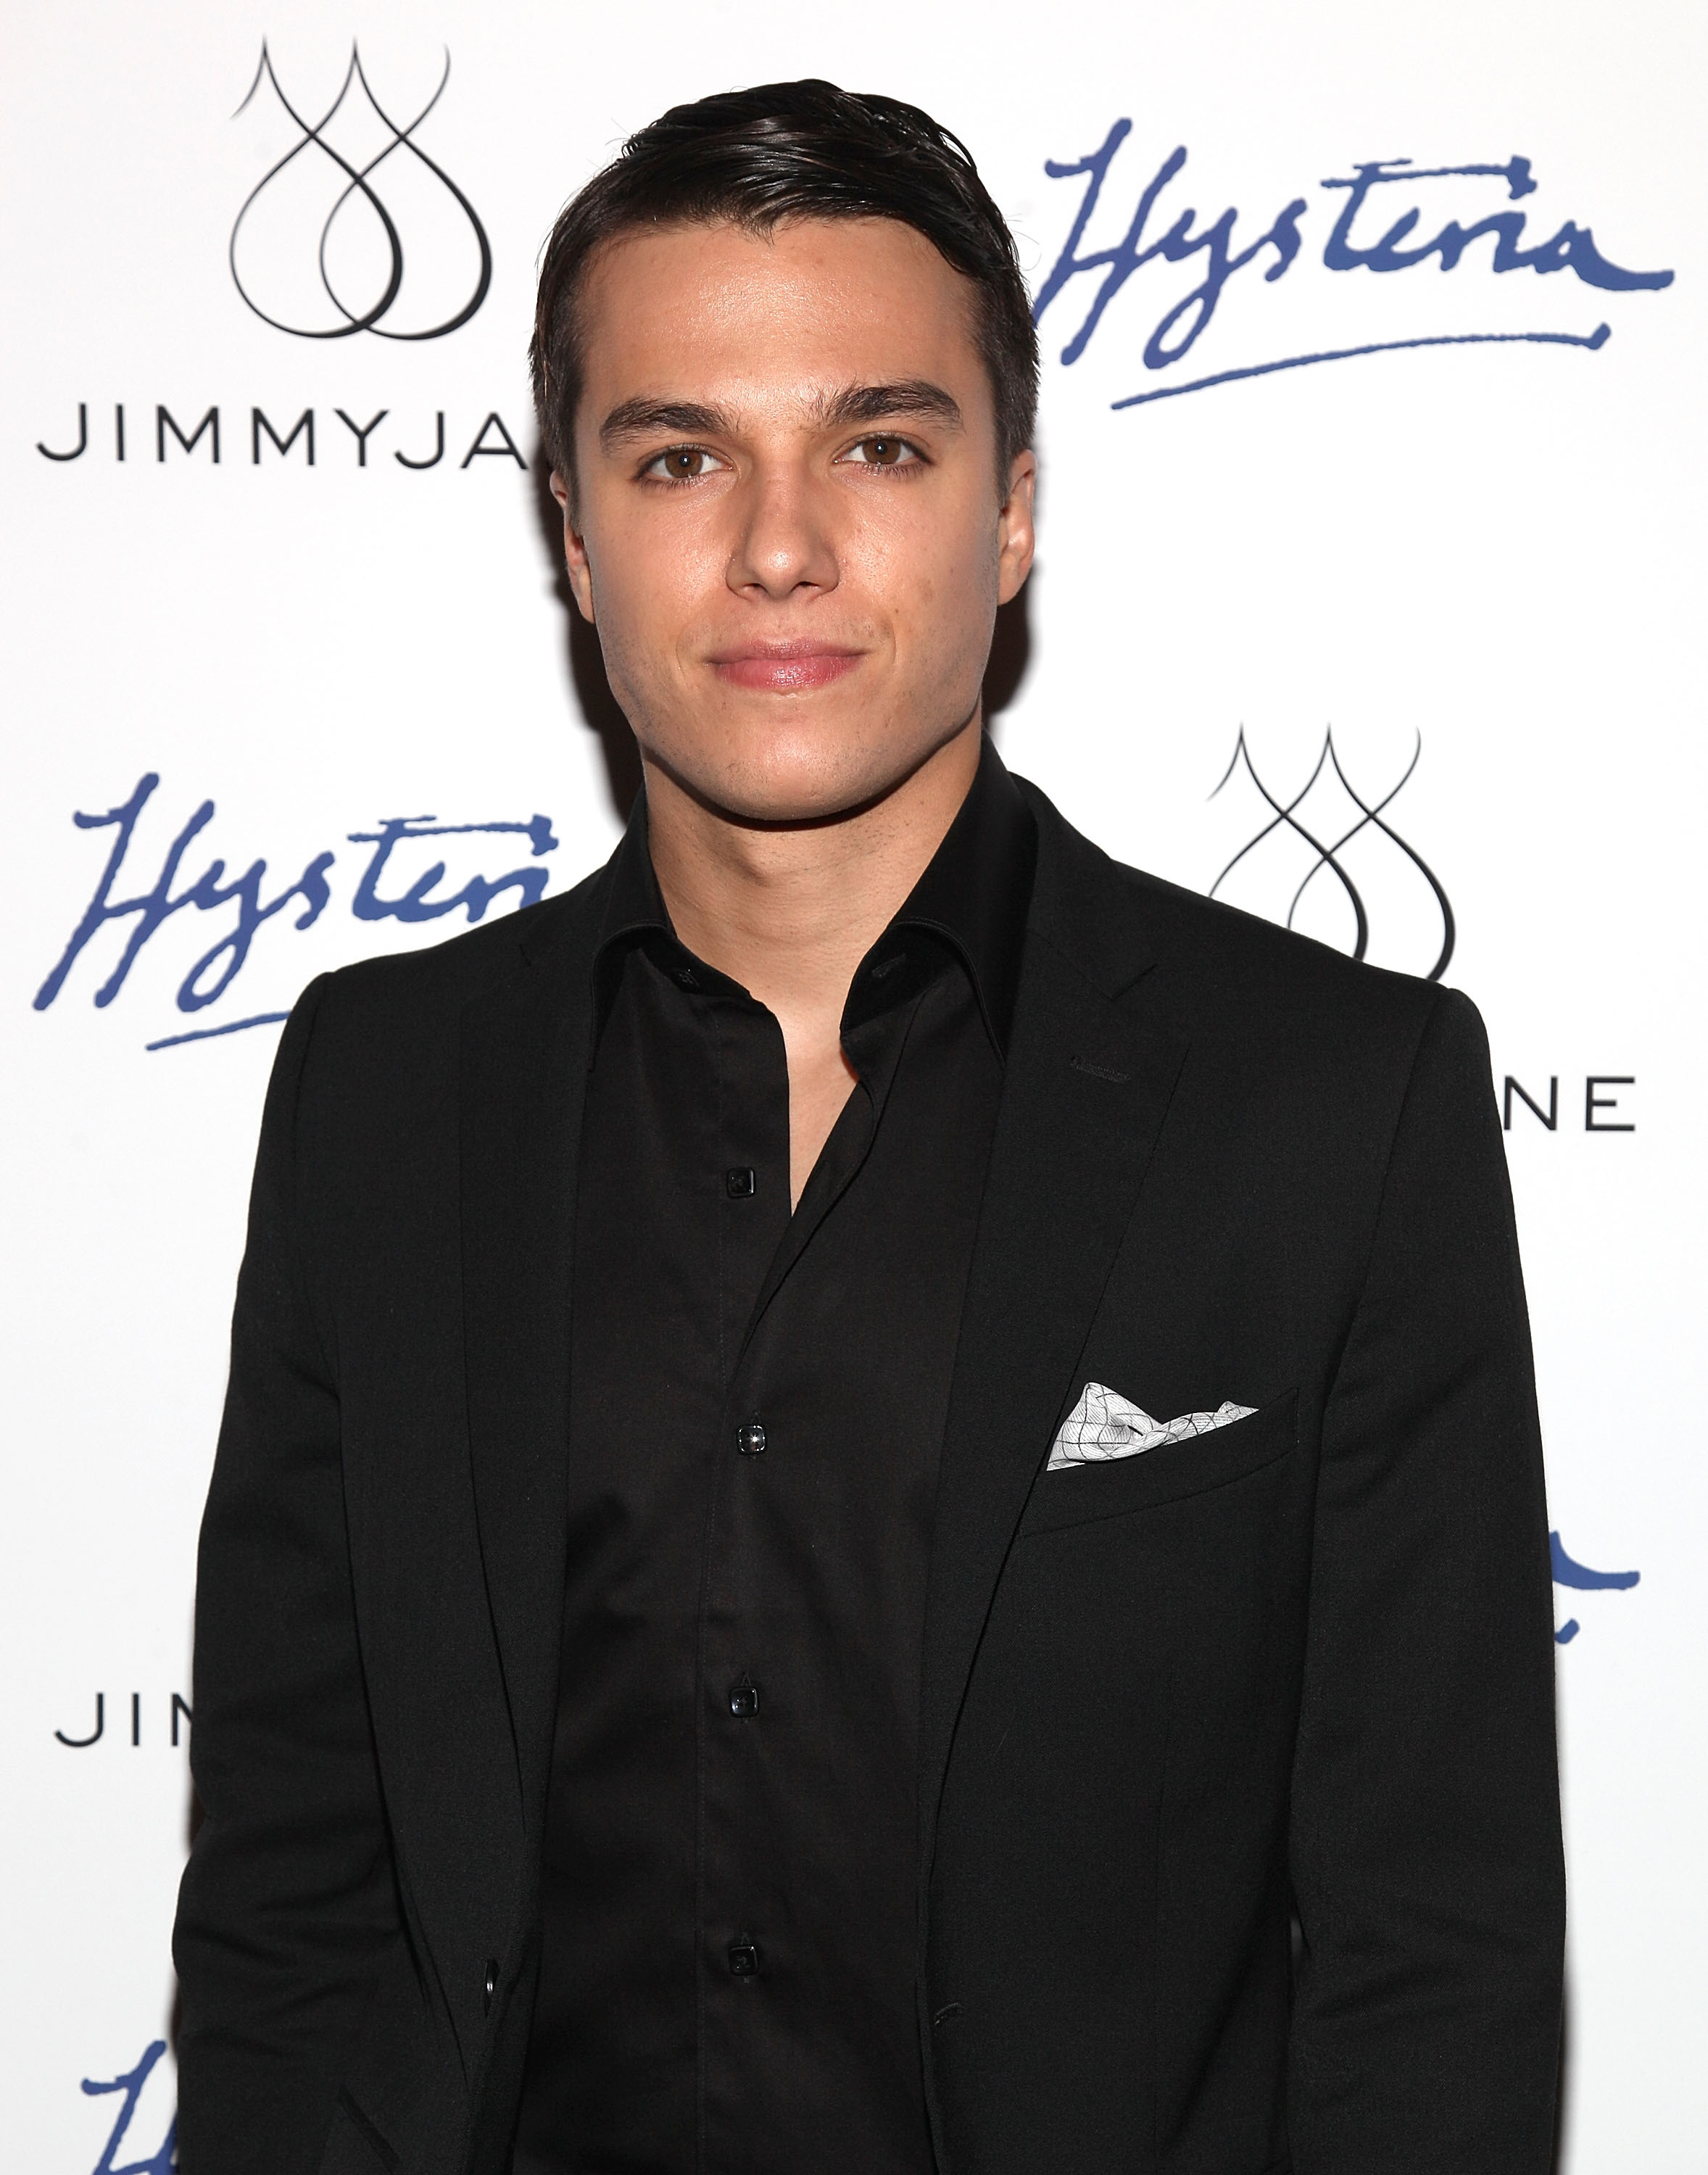 Chris Riggi attends the "Hysteria" New York special screening at Sunshine Landmark on May 14, 2012, in New York City. | Source: Getty Images